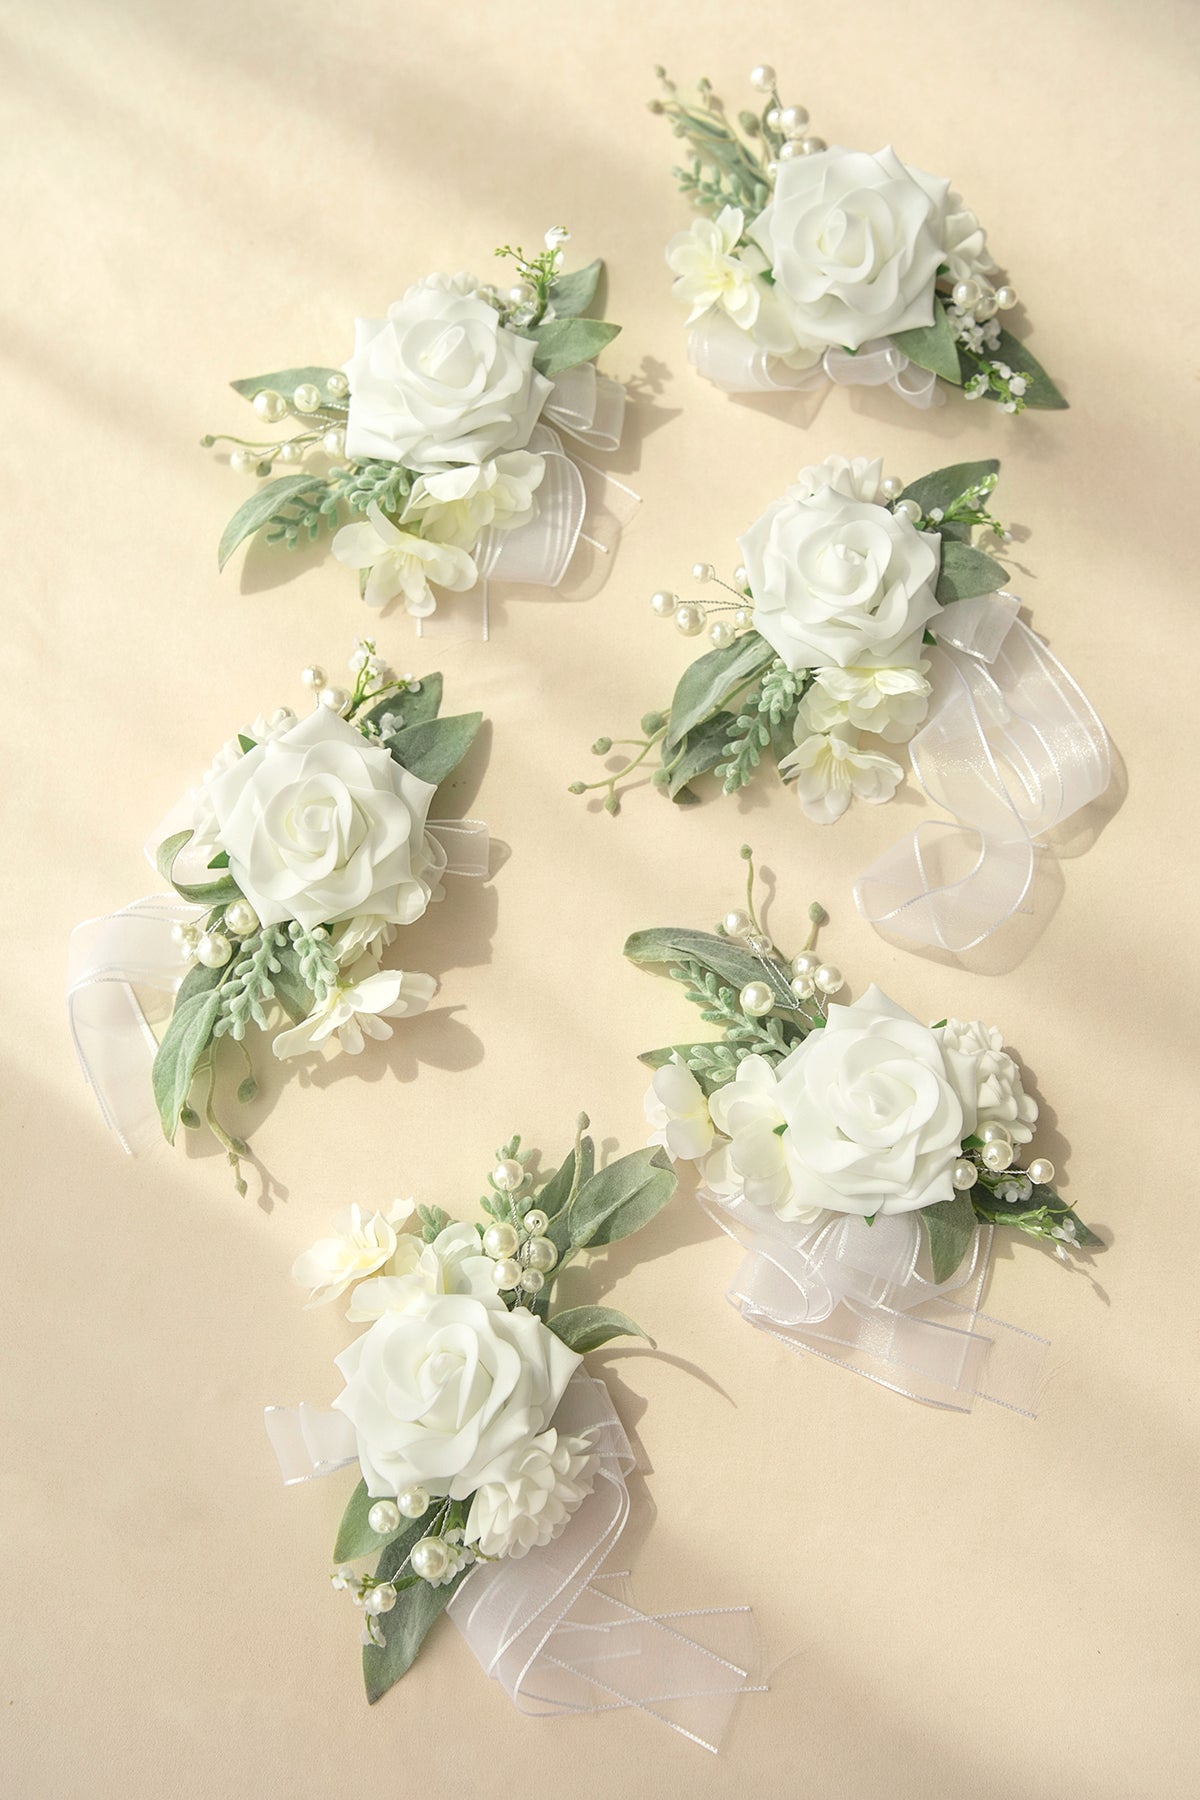 Wedding Wrist Corsages / Shoulder Corsages - Ivory & Cream – Ling's Moment